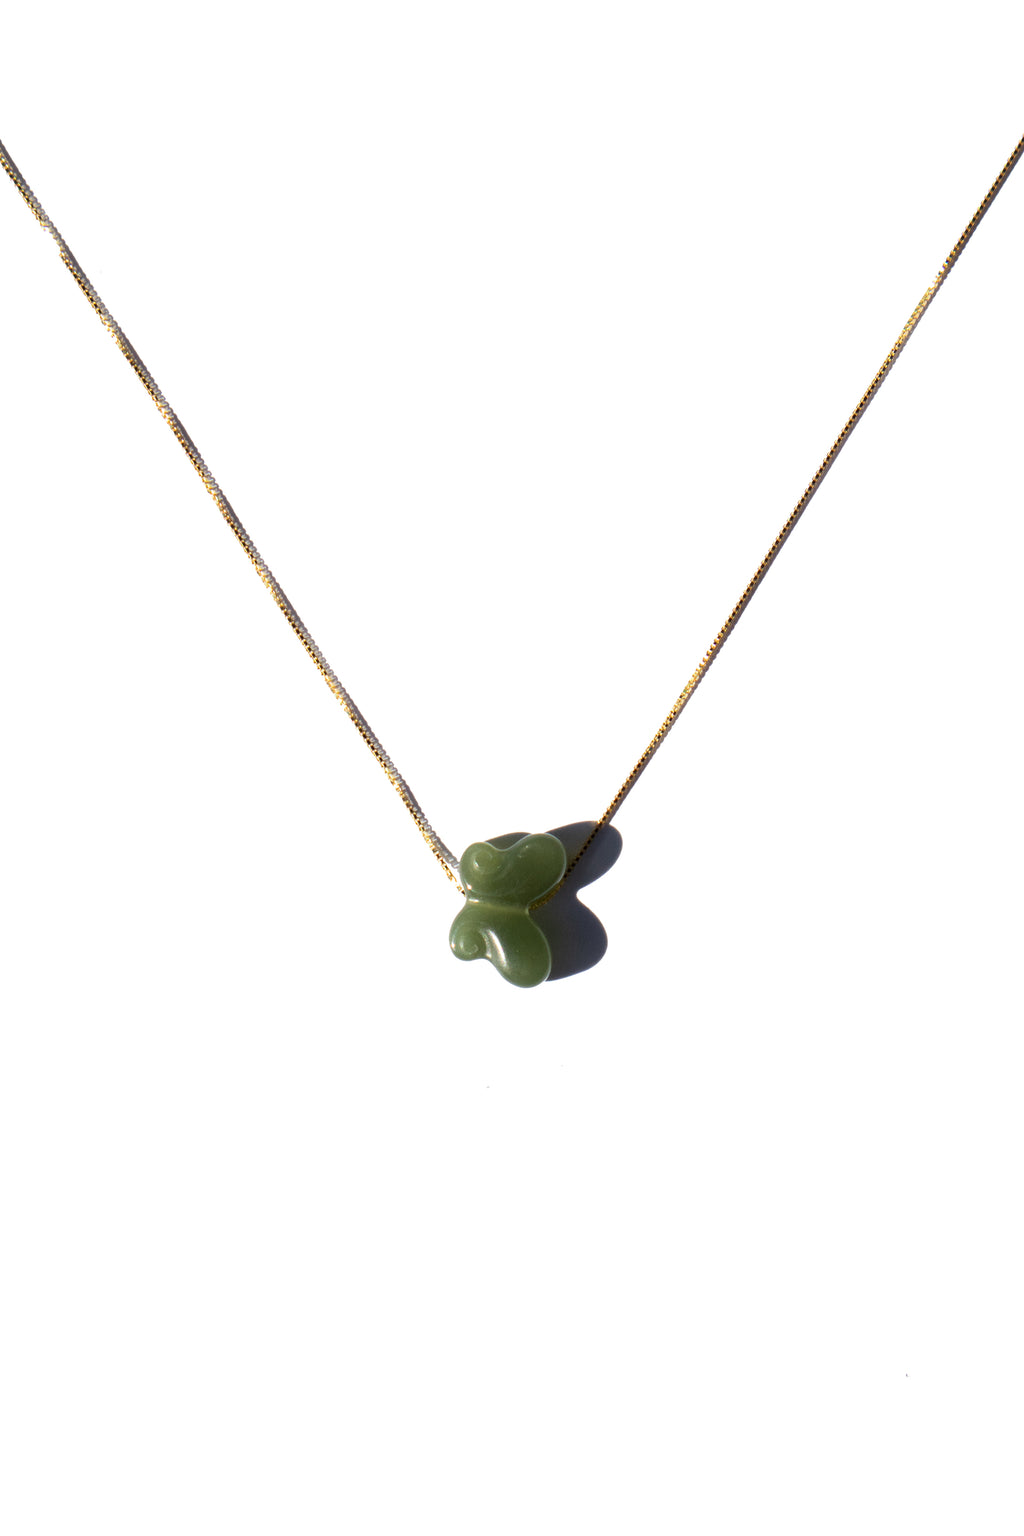 seree-green-nephrite-butterfly-jade-pendant-necklace